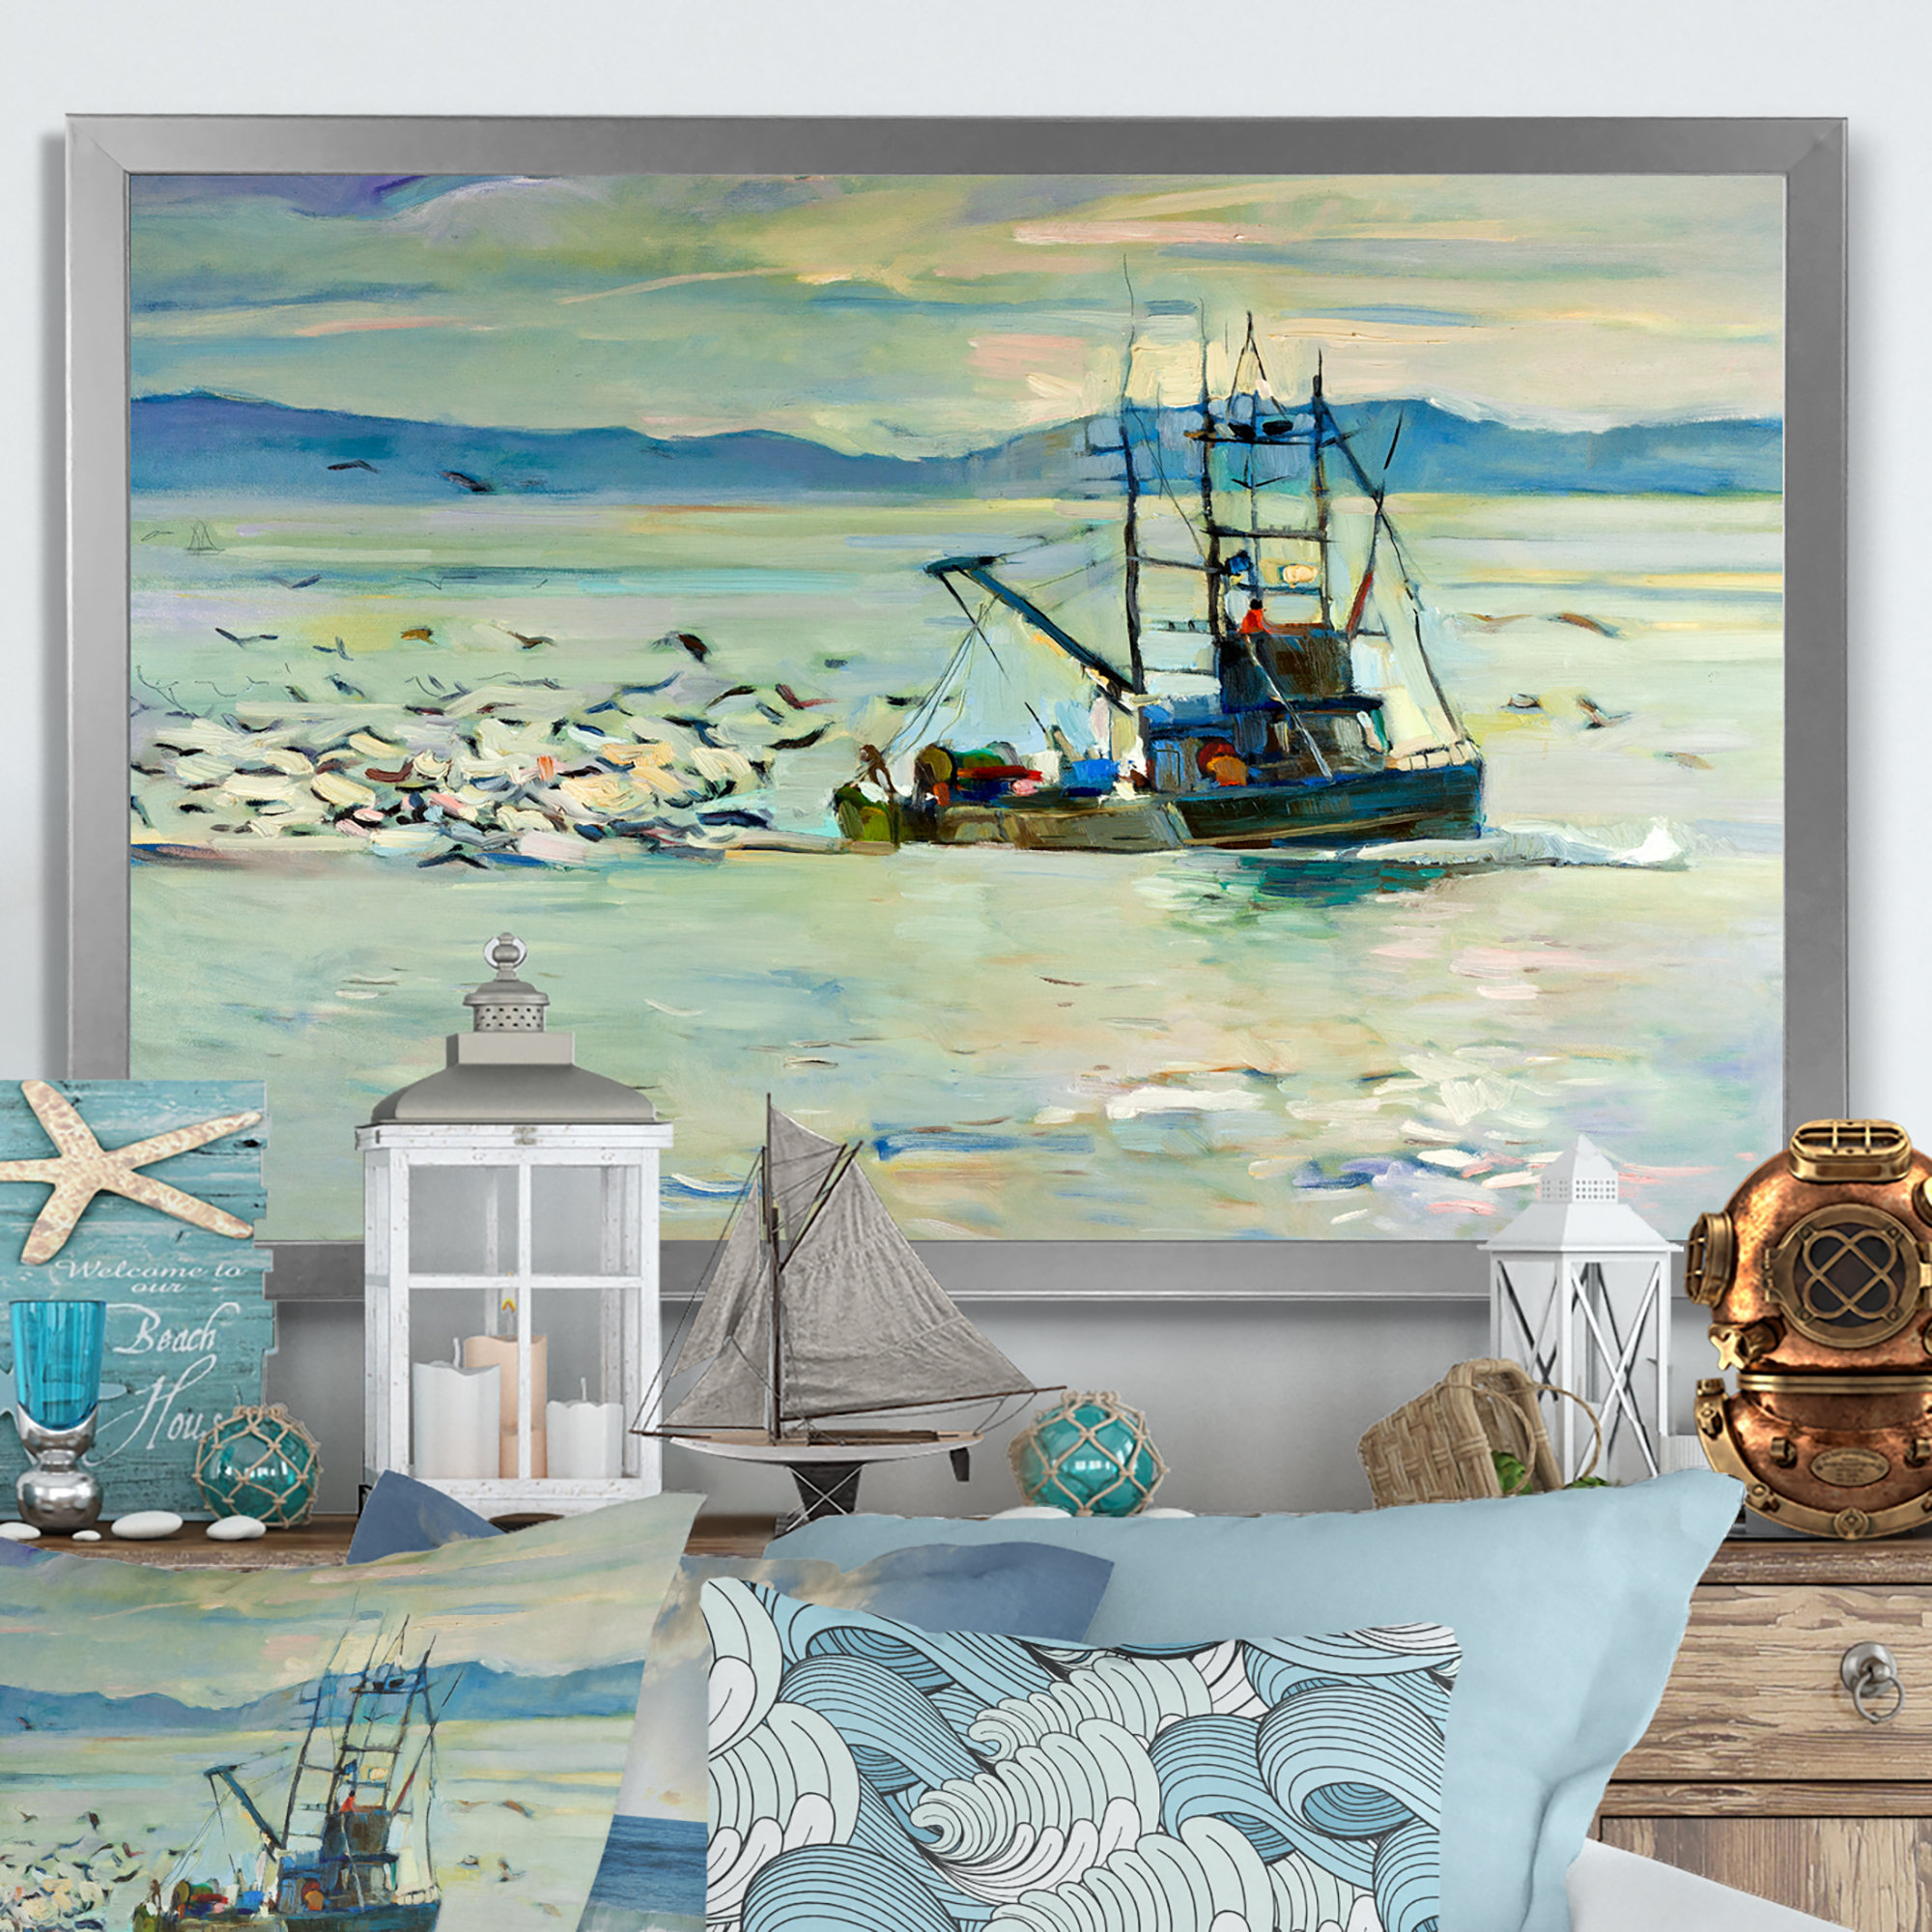 Fishing Boat - Picture Frame Print On Canvas Highland Dunes Size: 8 H x 12 W x 1 D, Format: White Picture Framed Canvas